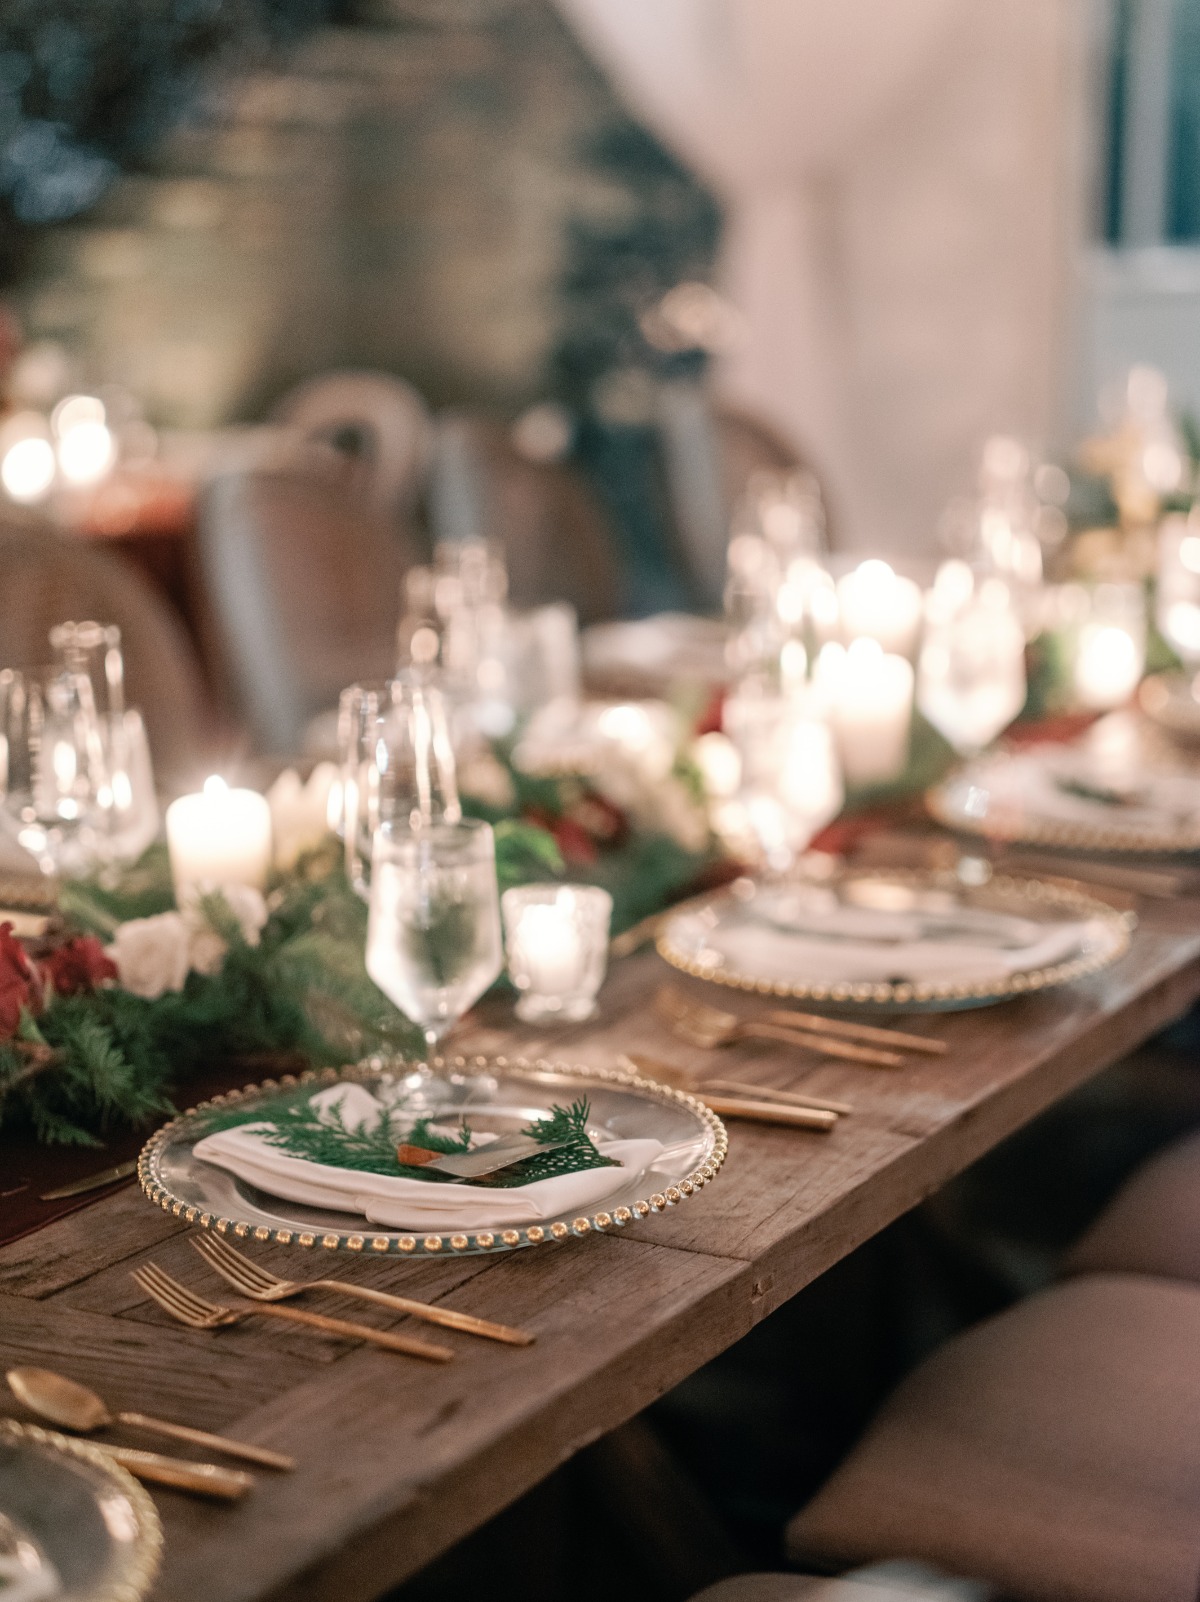 Christmas-inspired placesettings